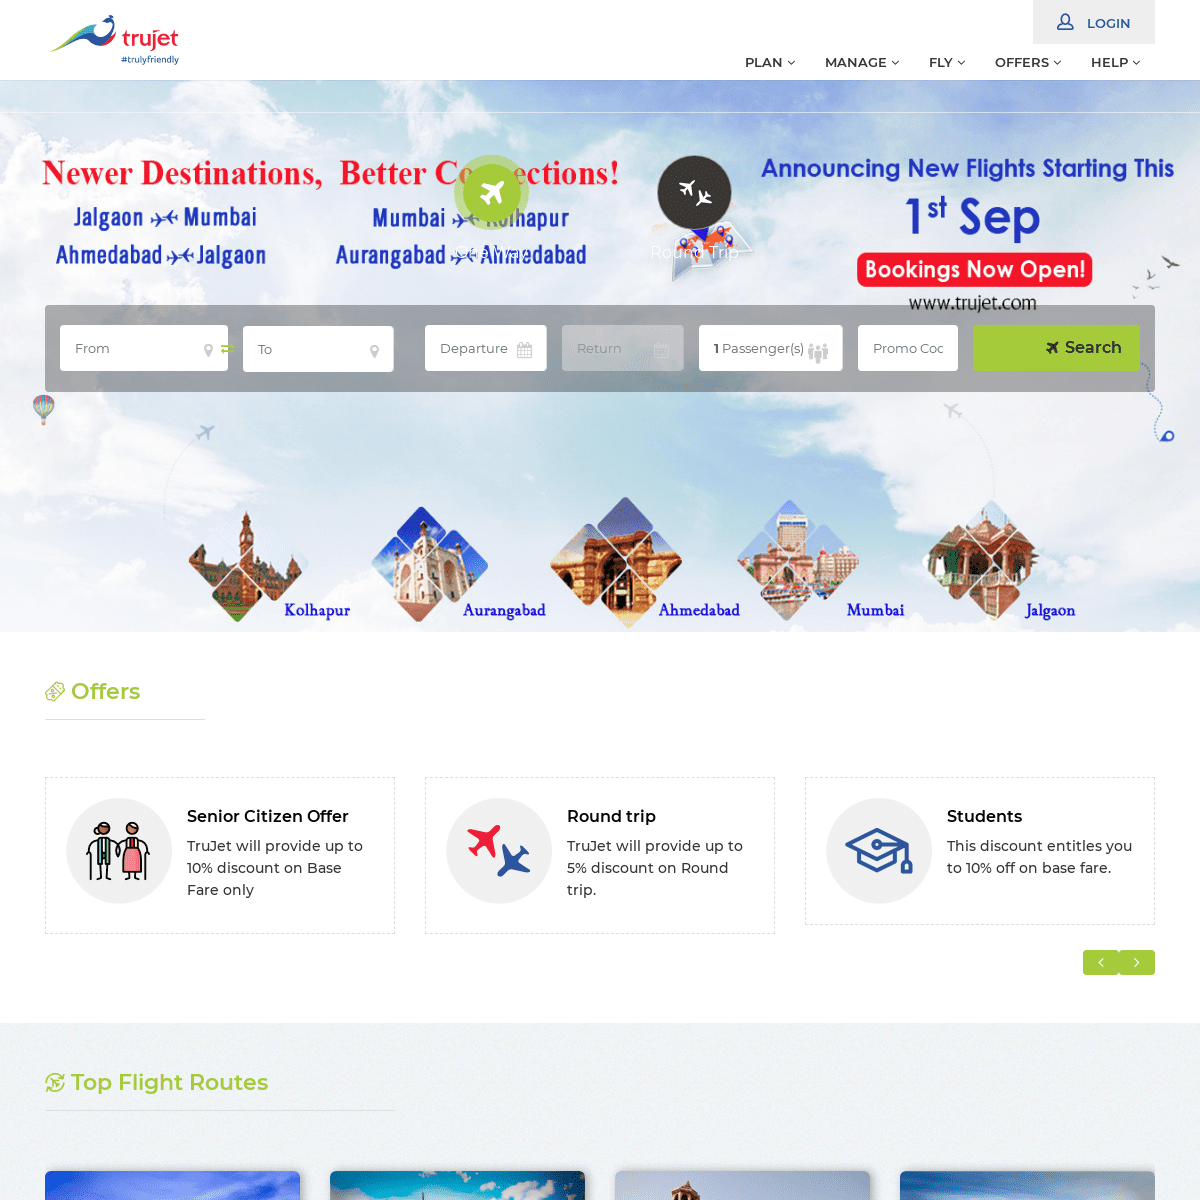 A complete backup of trujet.com